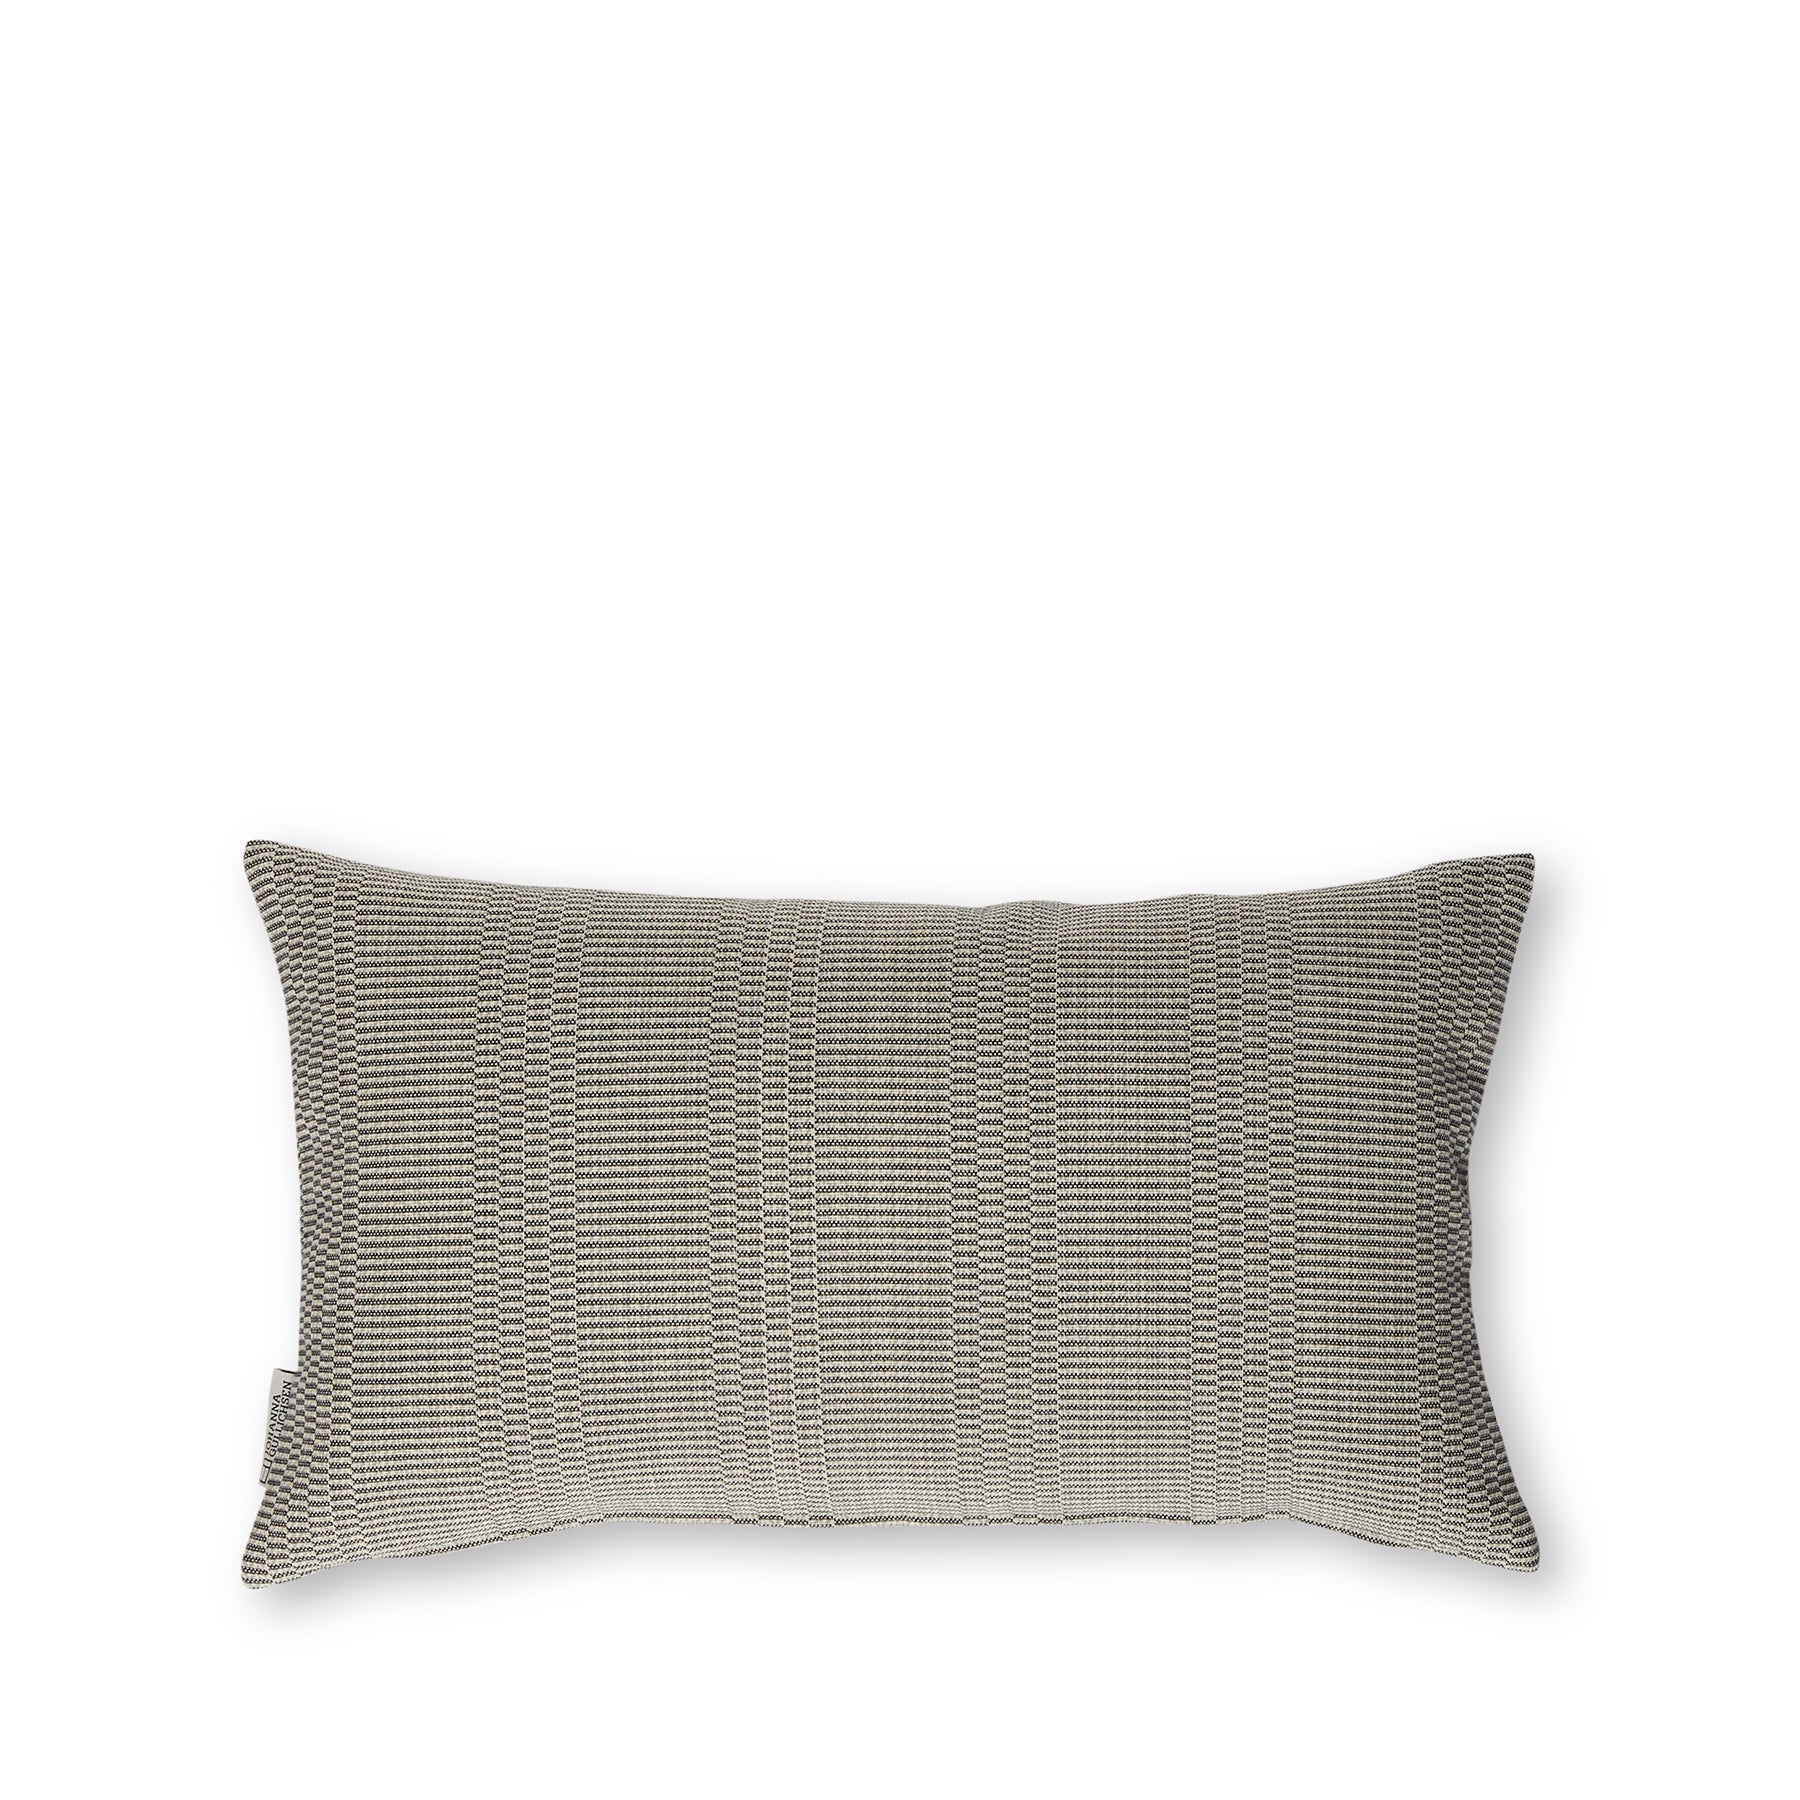 Eos Pillow in Light Grey Zoom Image 1